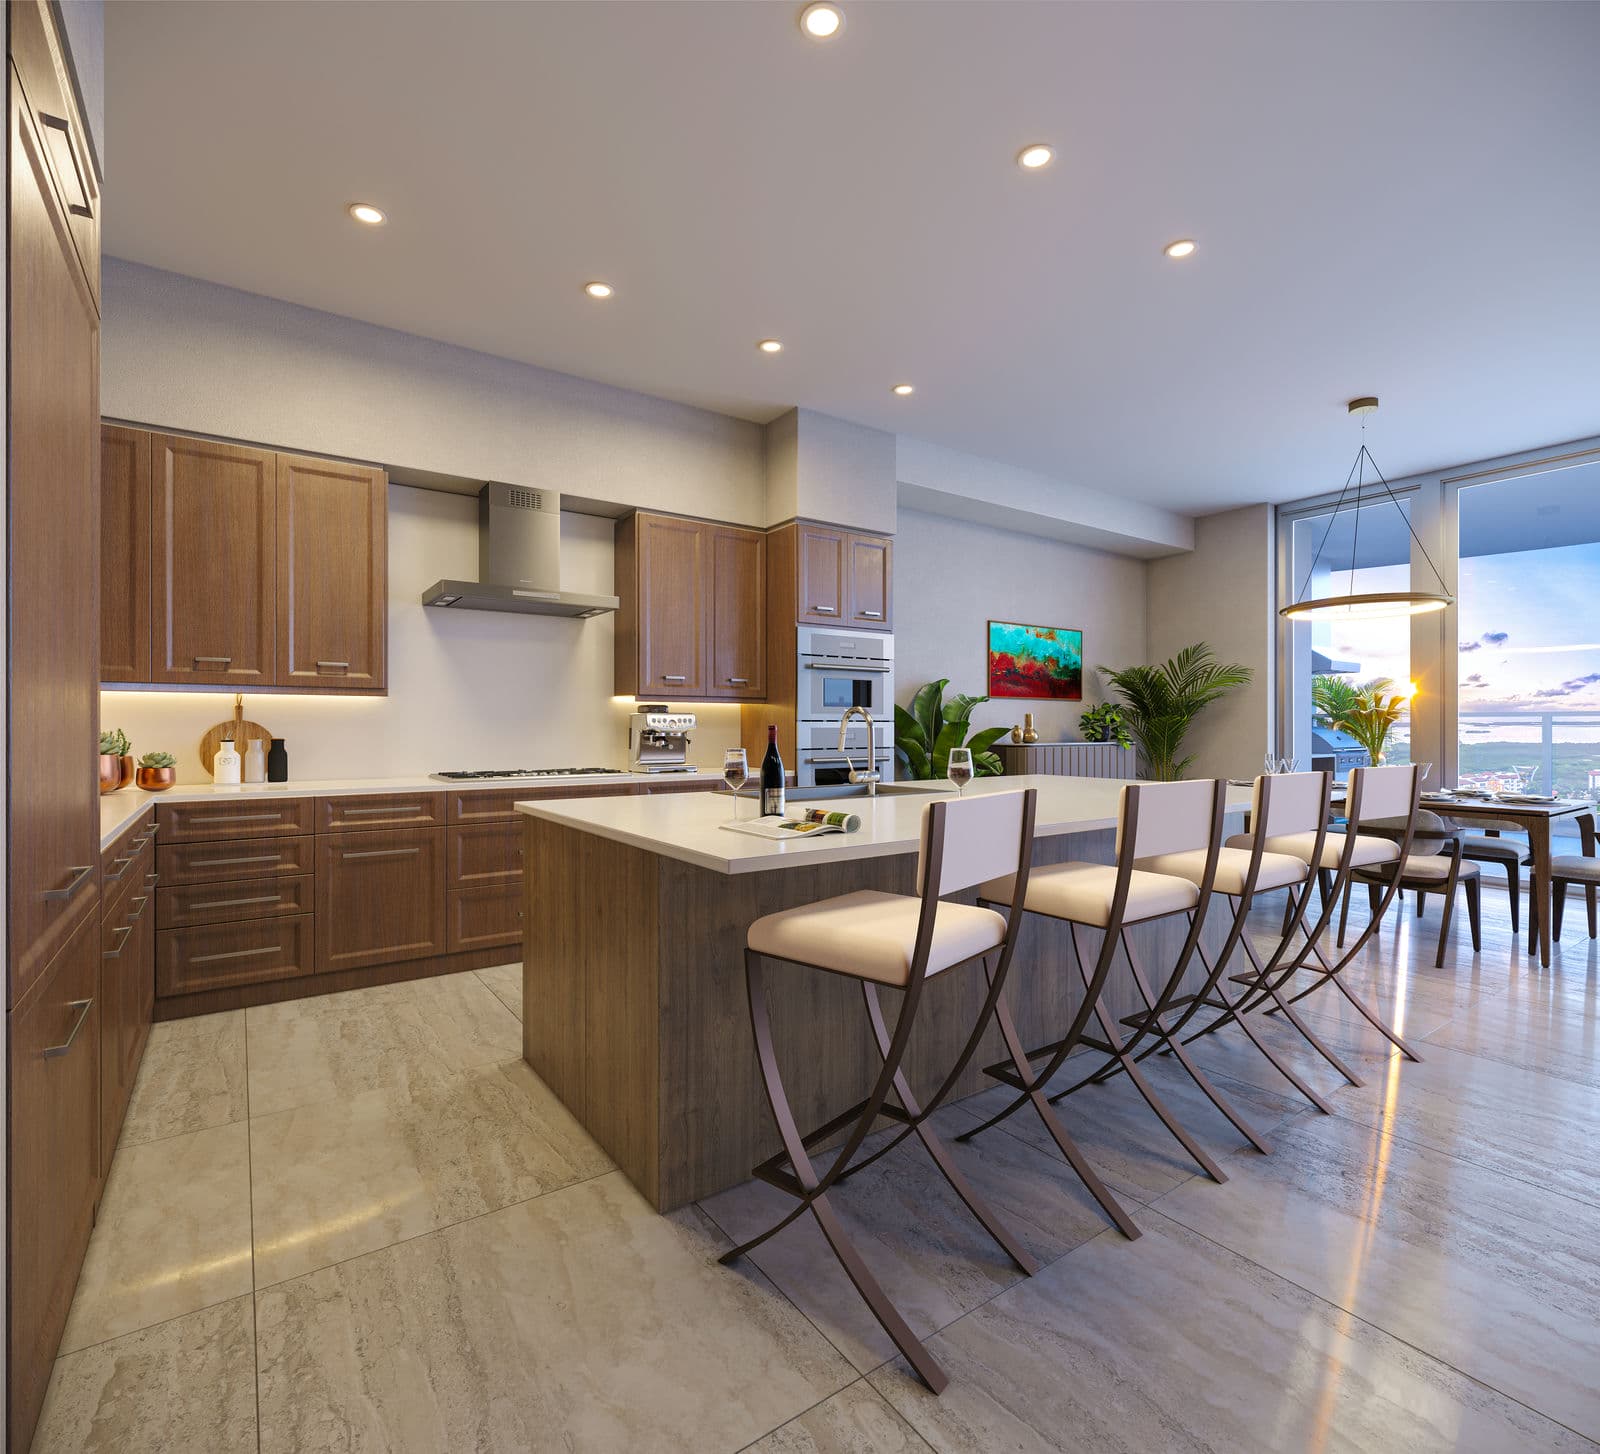 Five Reasons Buyers Love Infinity’s Masterful Kitchen Layouts